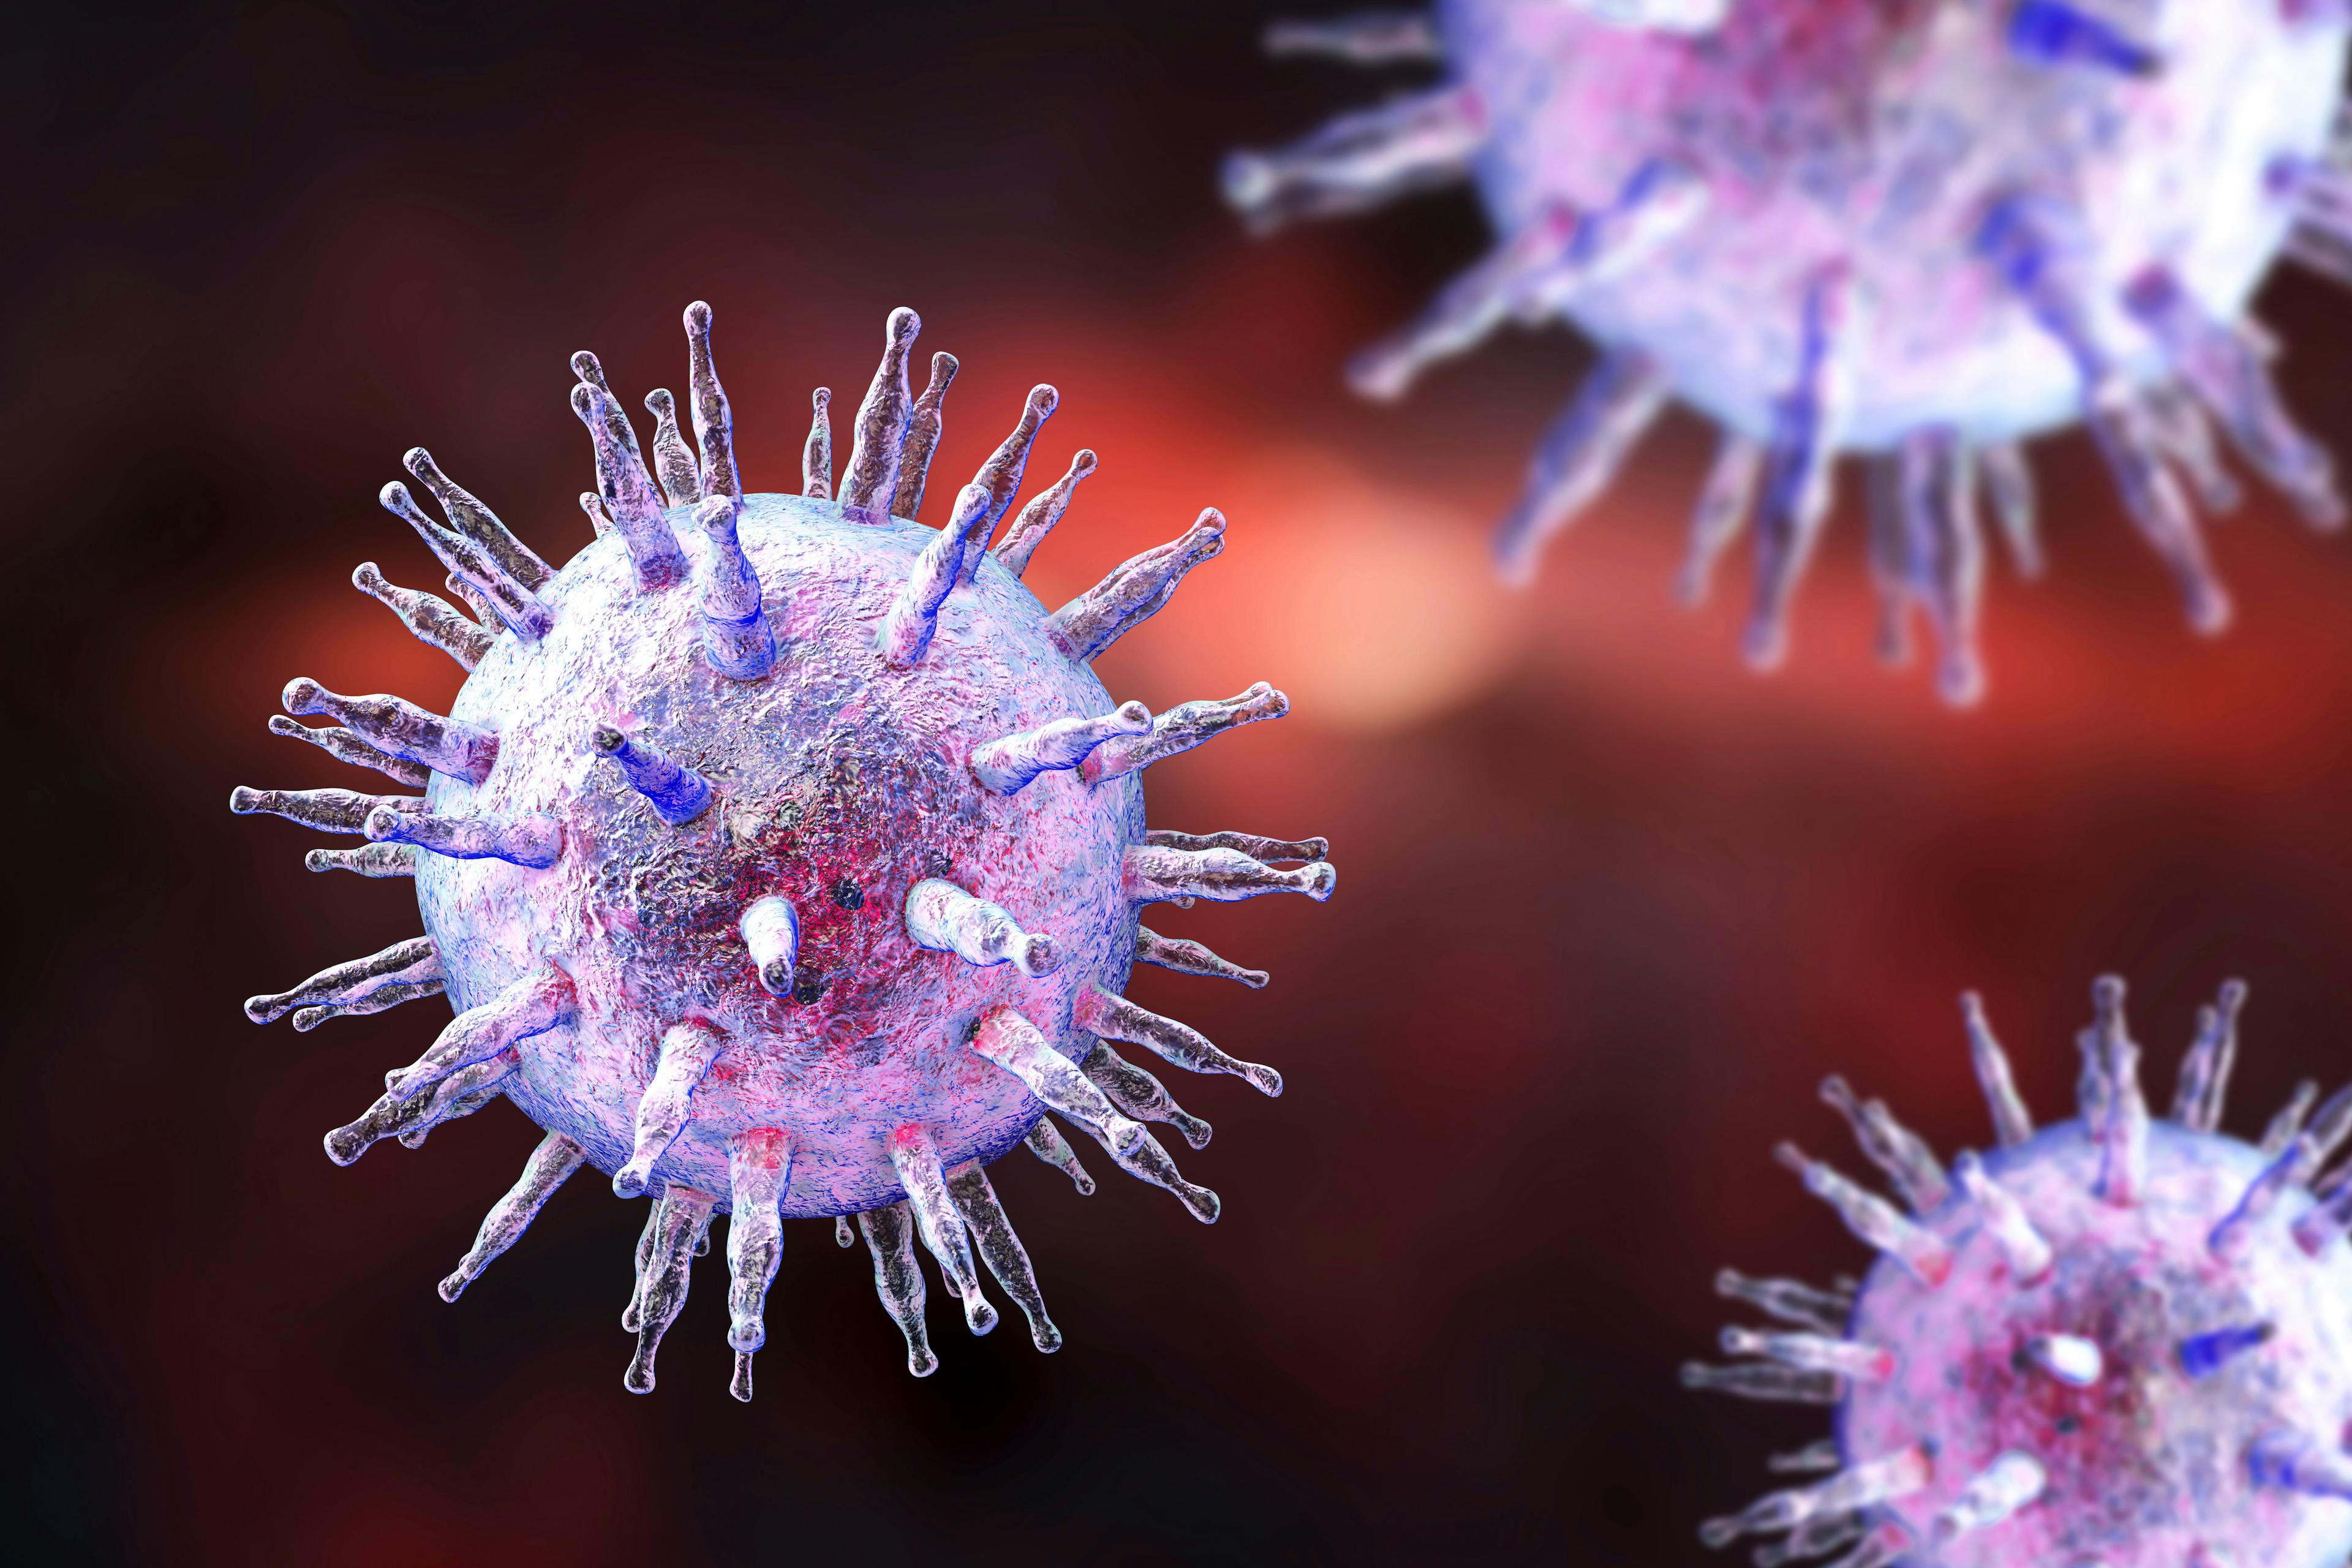 Approximately 90% of Americans are infected with Epstein-Barr virus by age 35. | image credit: Dr_Microbe - stock.adobe.com